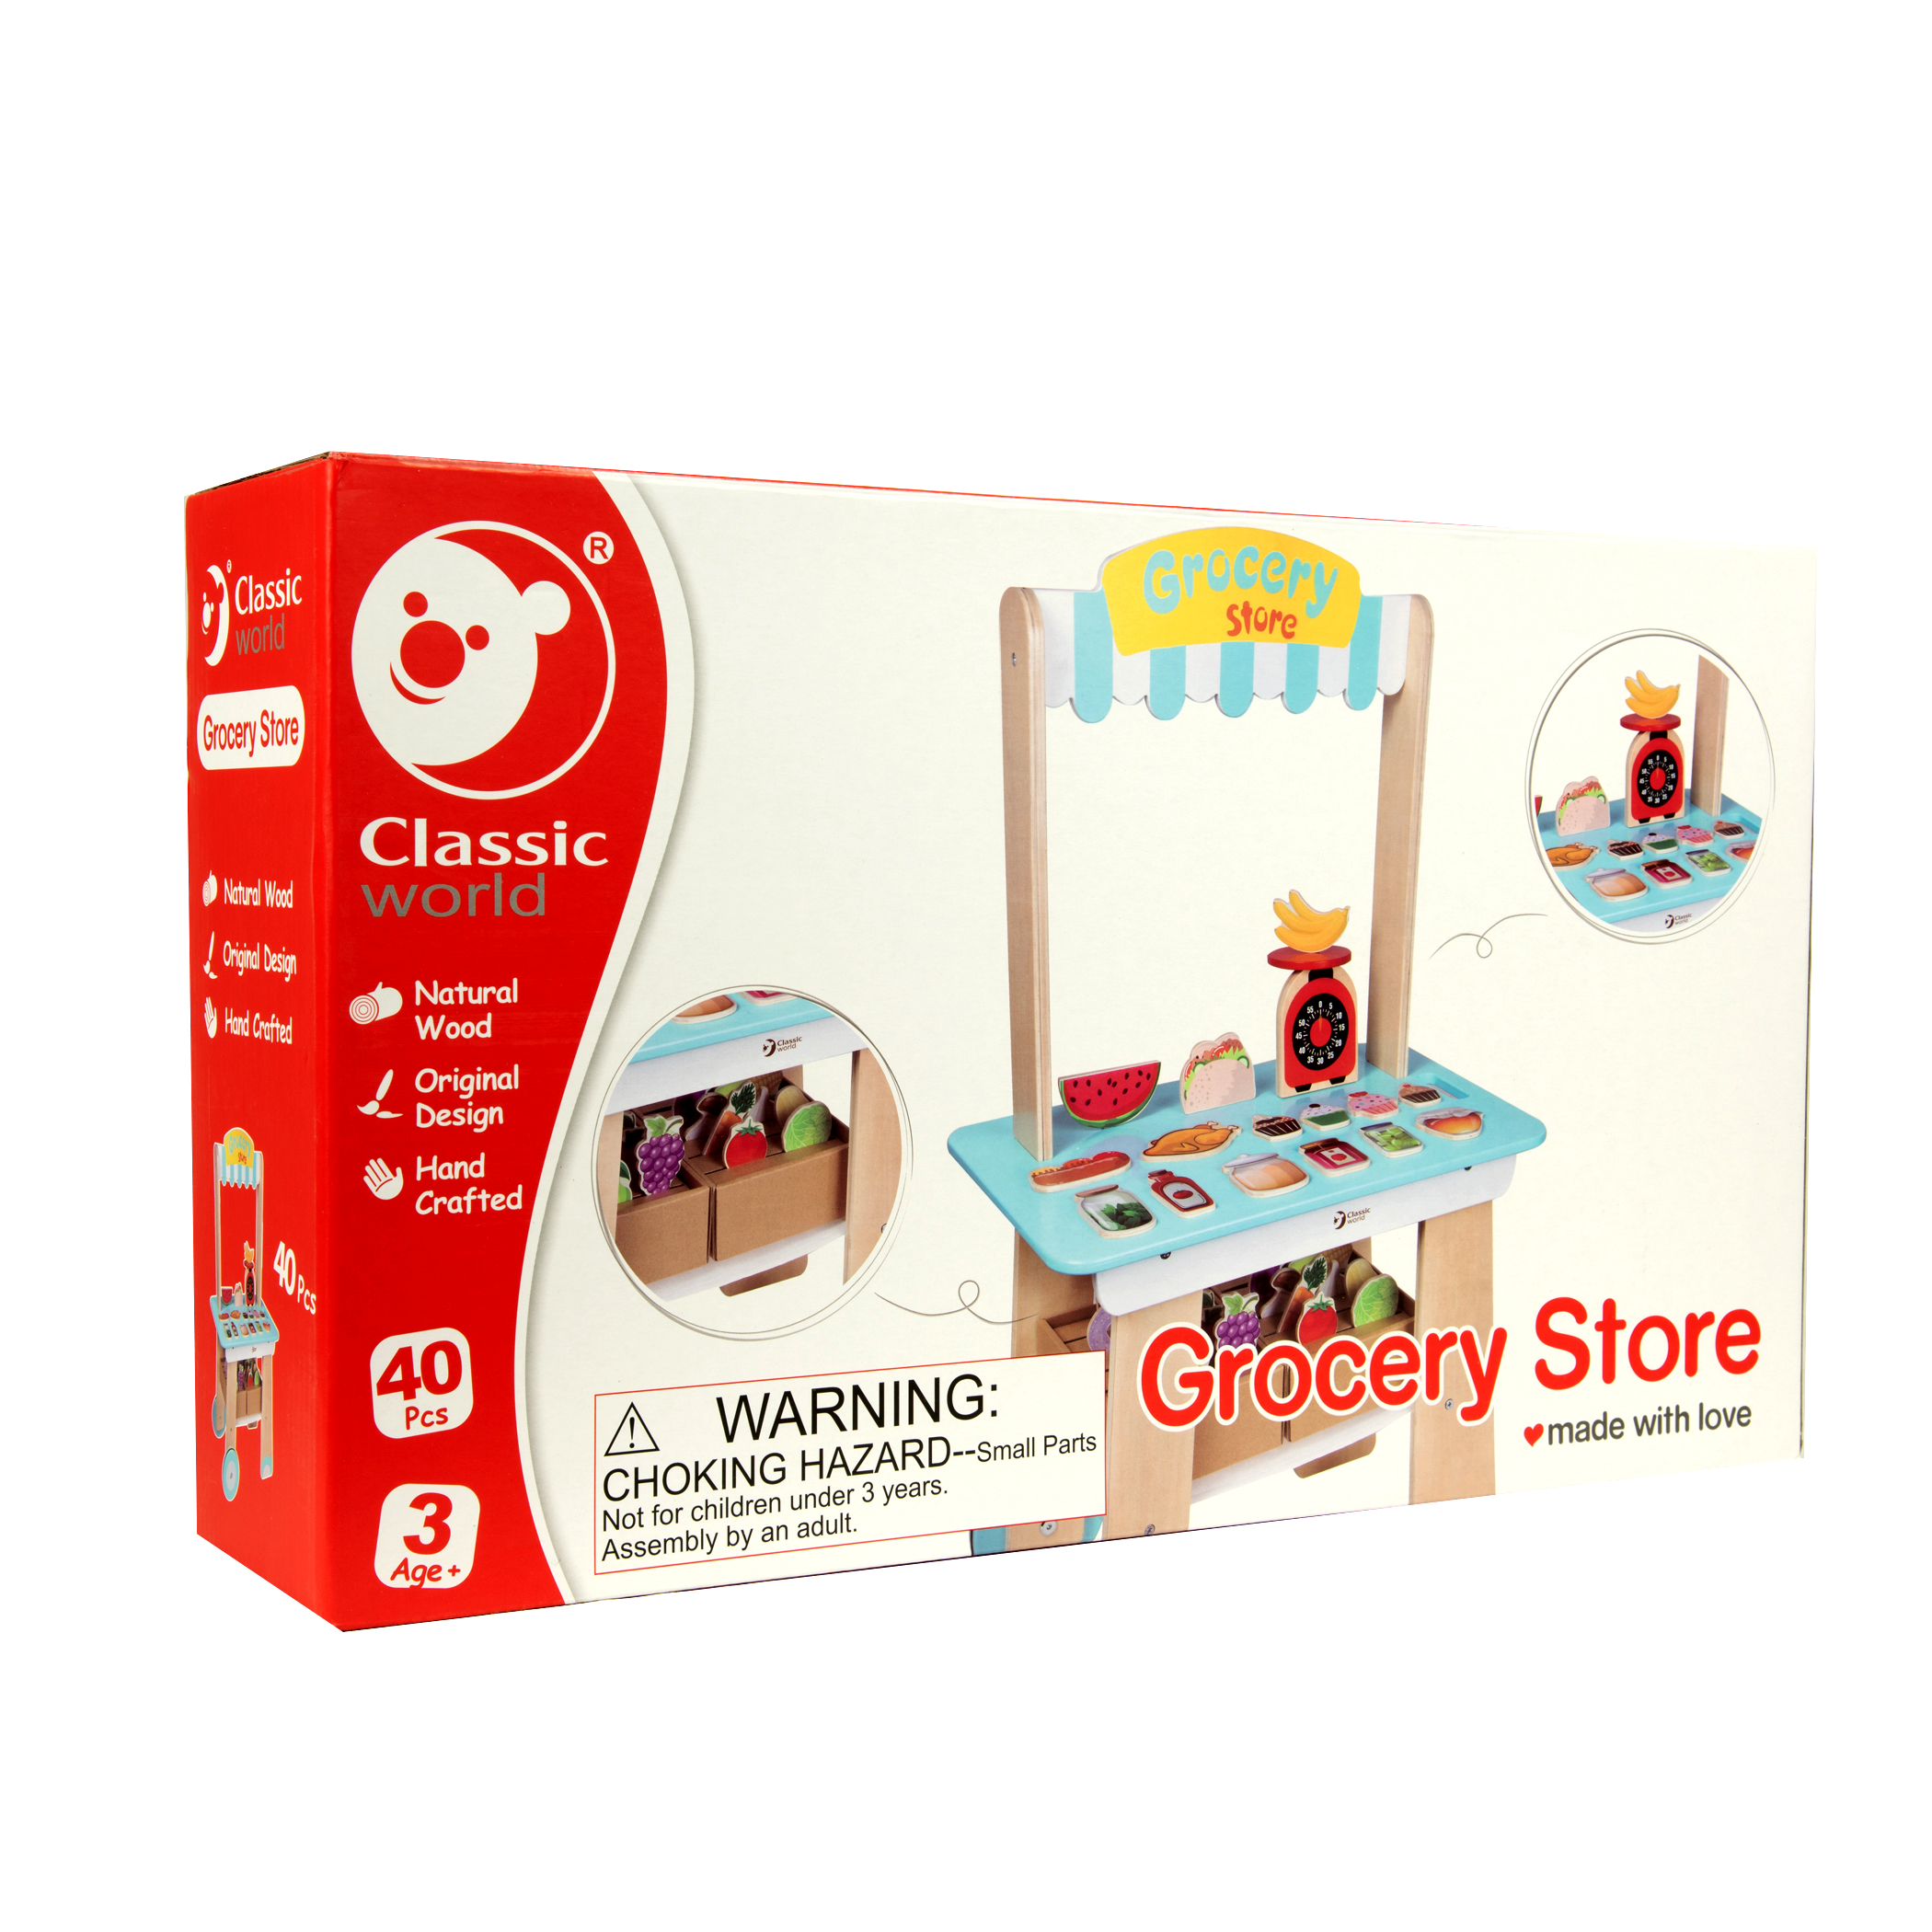 Classic World Wooden Toy Grocery Store Playset - Ages 3 Years and up. - image 2 of 2